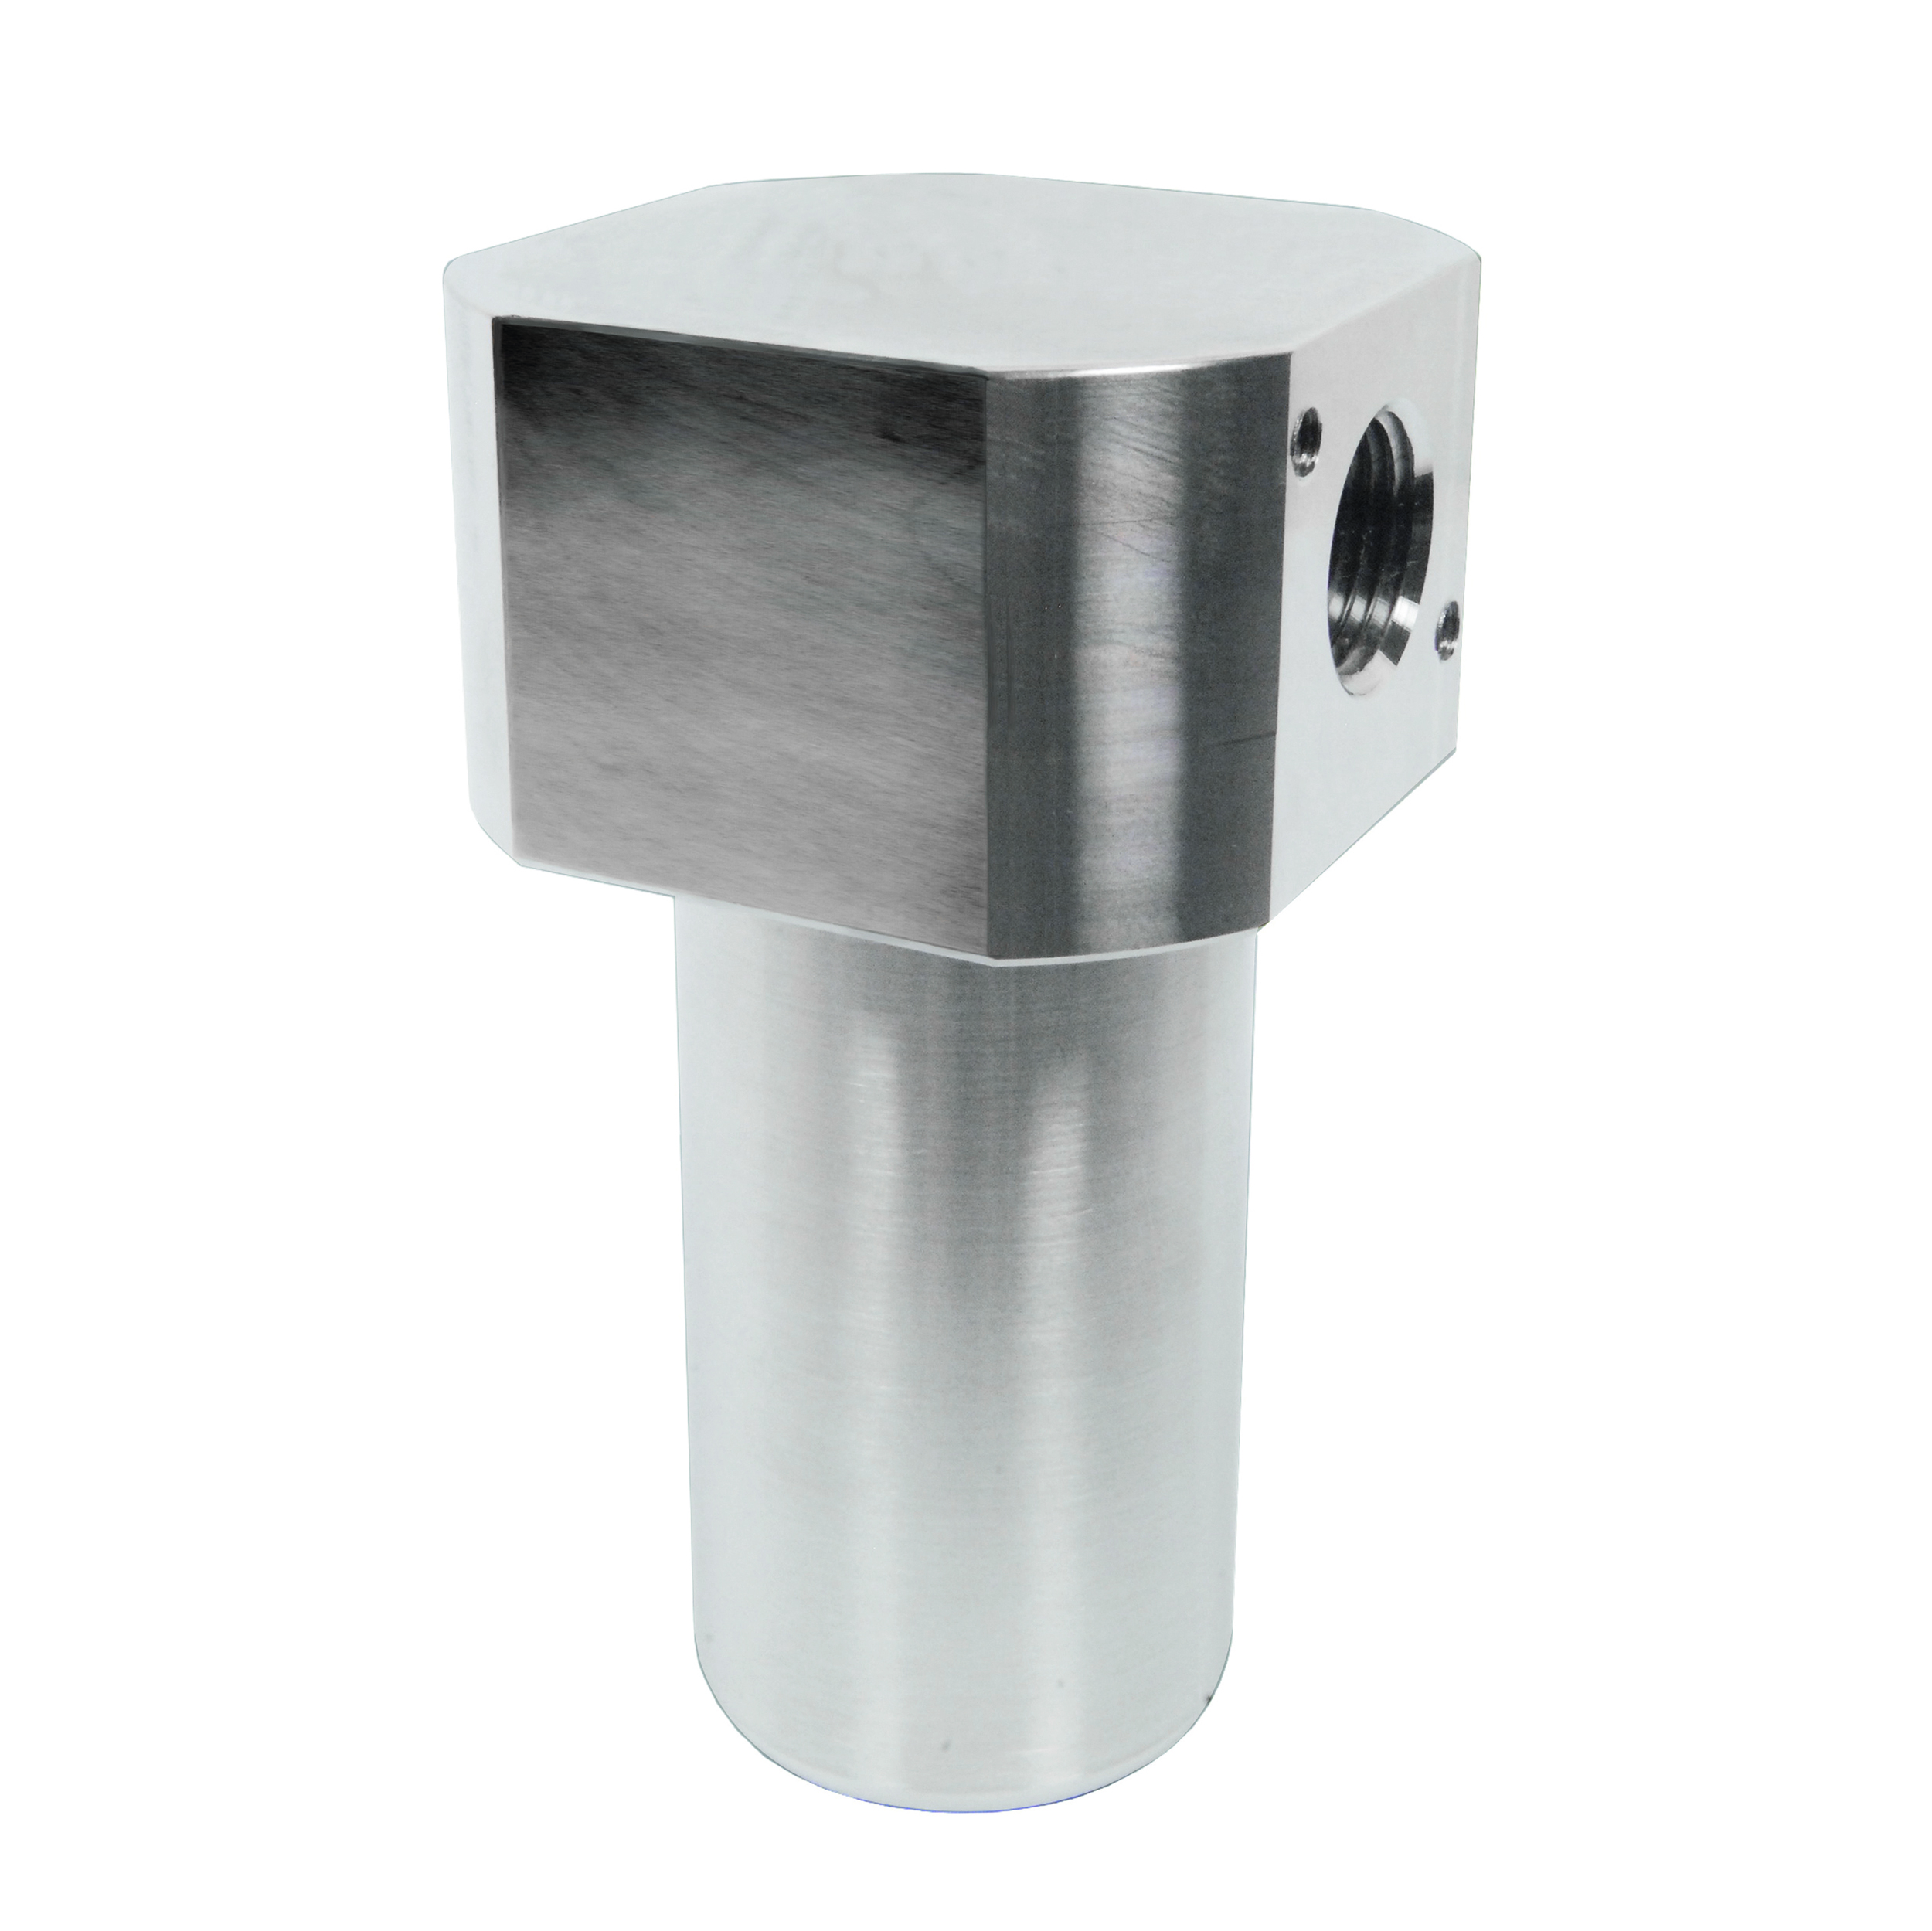 Compressed air filter type 692 stainless steel, drain valve excluded, BG 20, G¼, filter porosity: 50 µm, QN: 2,500 Nl/min